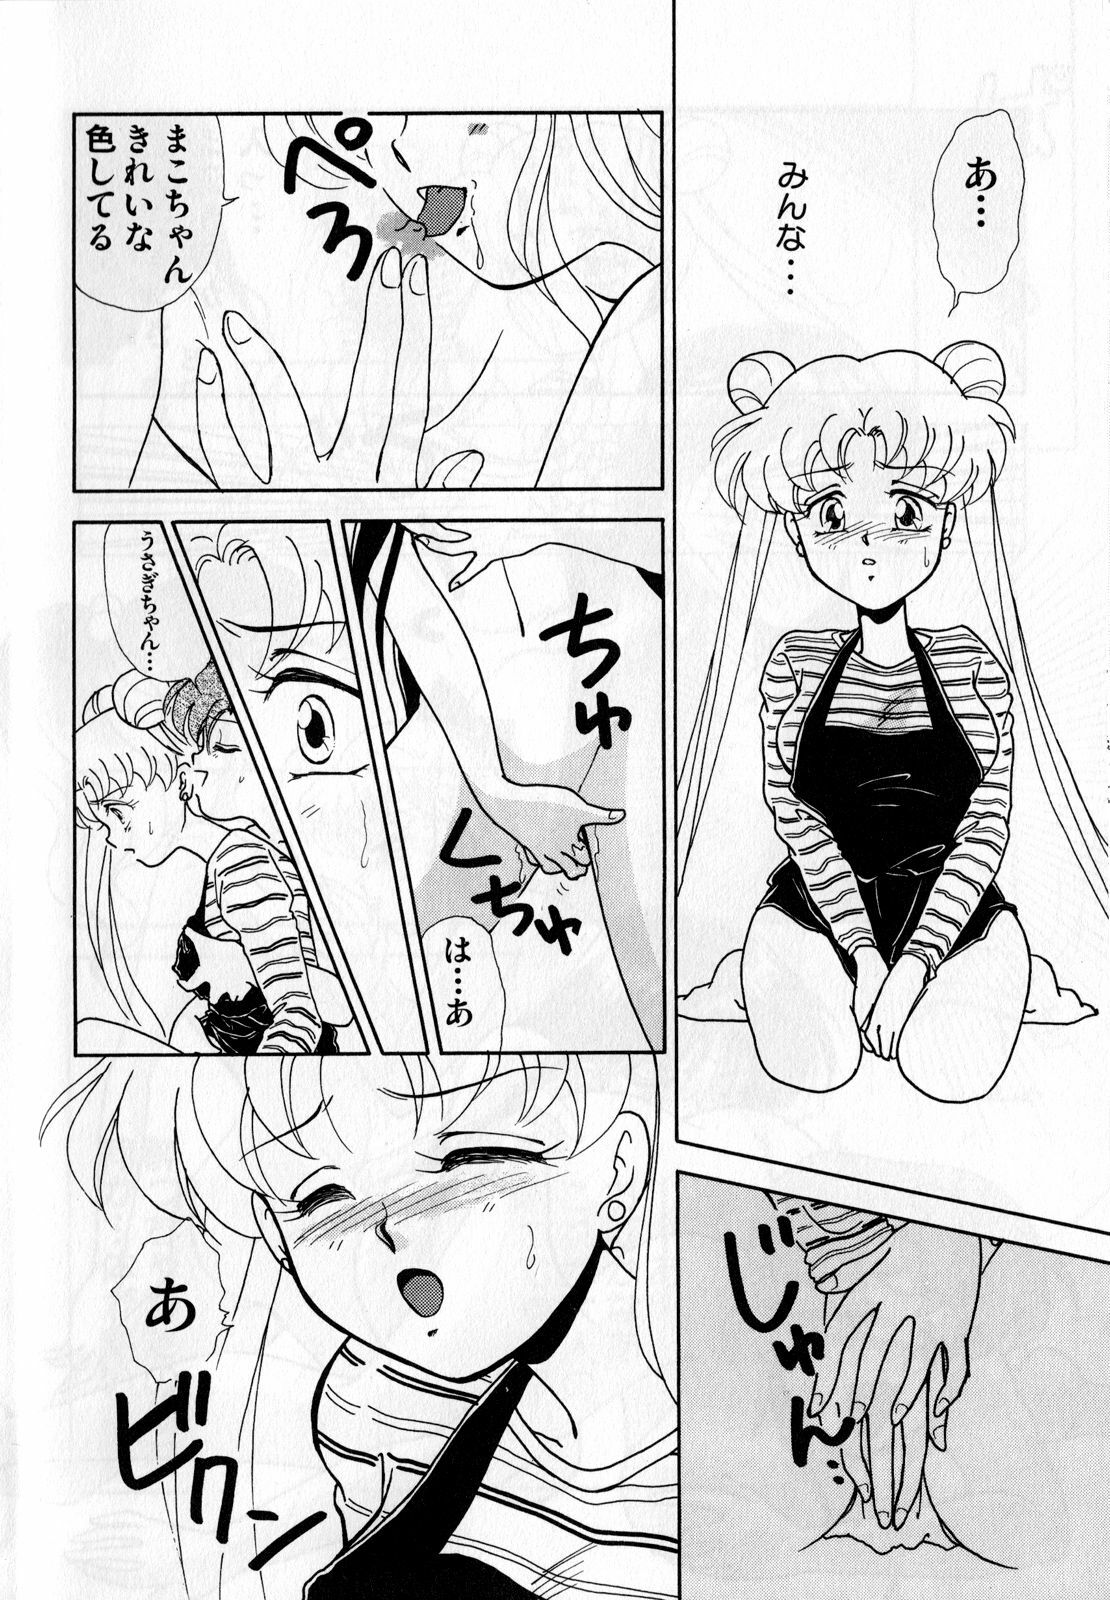 [Anthology] Lunatic Party 3 (Sailor Moon) page 11 full